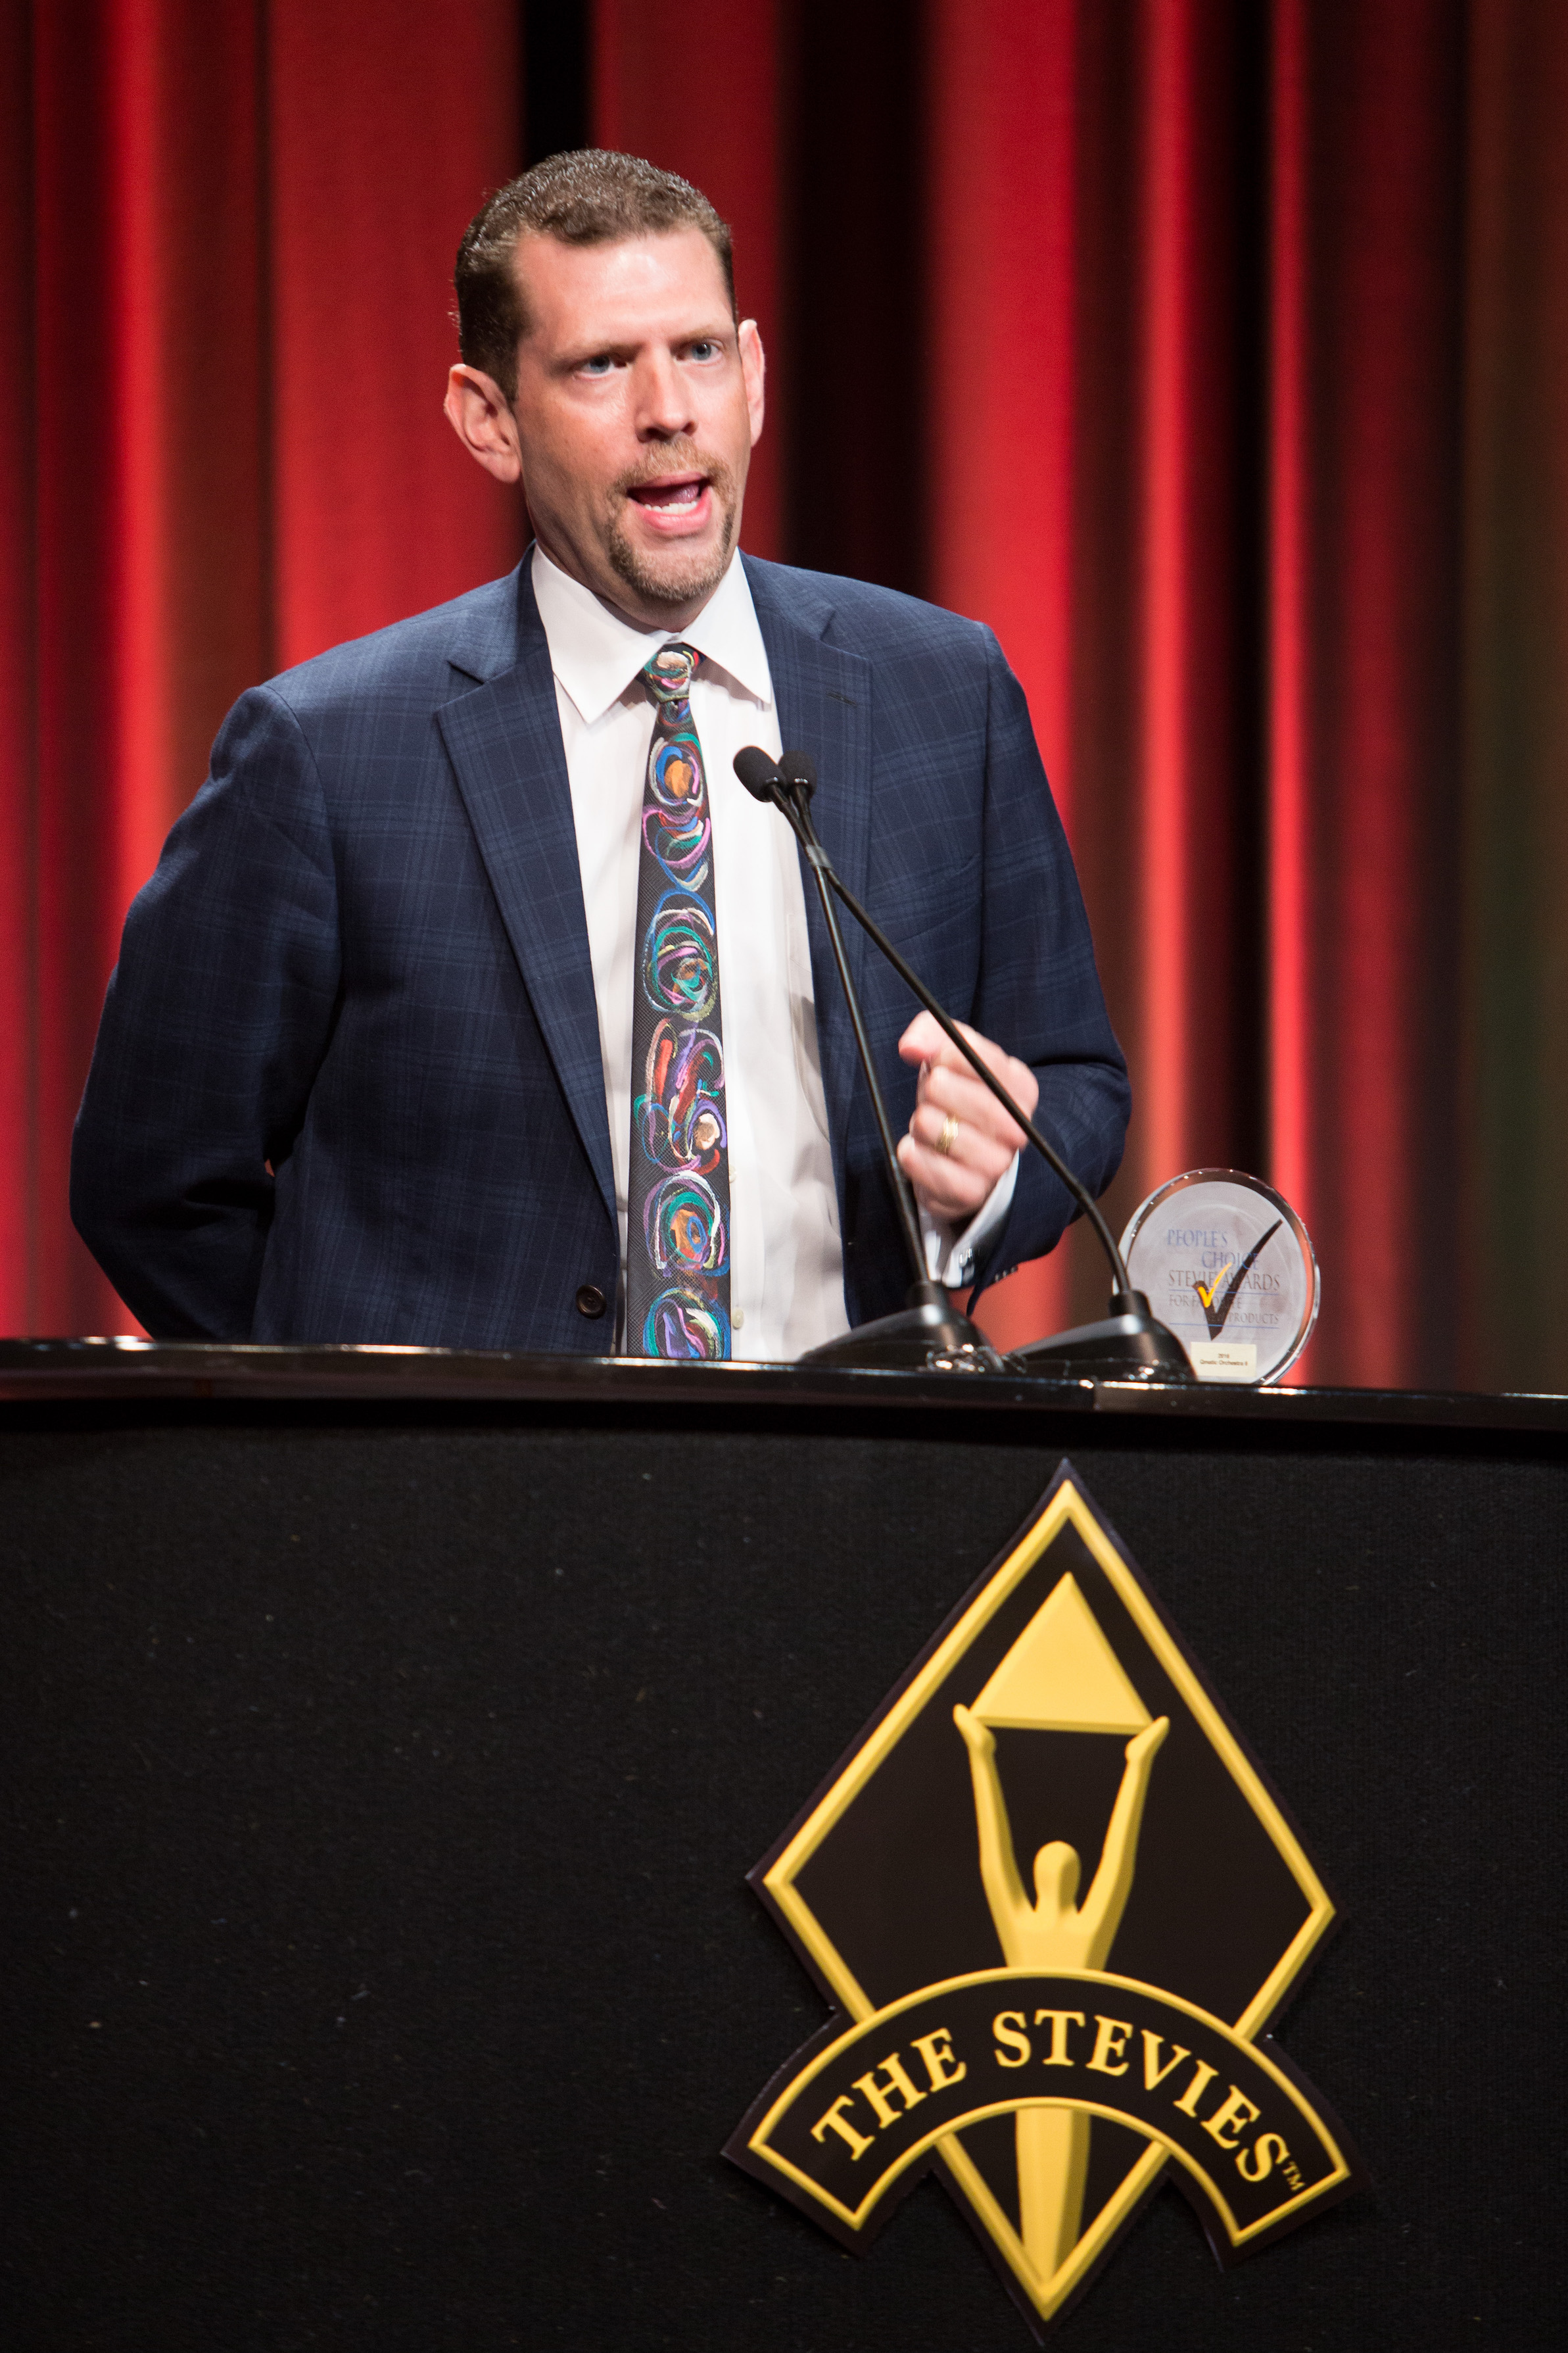 Qmatic U.S. CEO Jeff Green accepts the People's Choice Stevie Award for Favorite New Product at the 2016 American Business Awards.